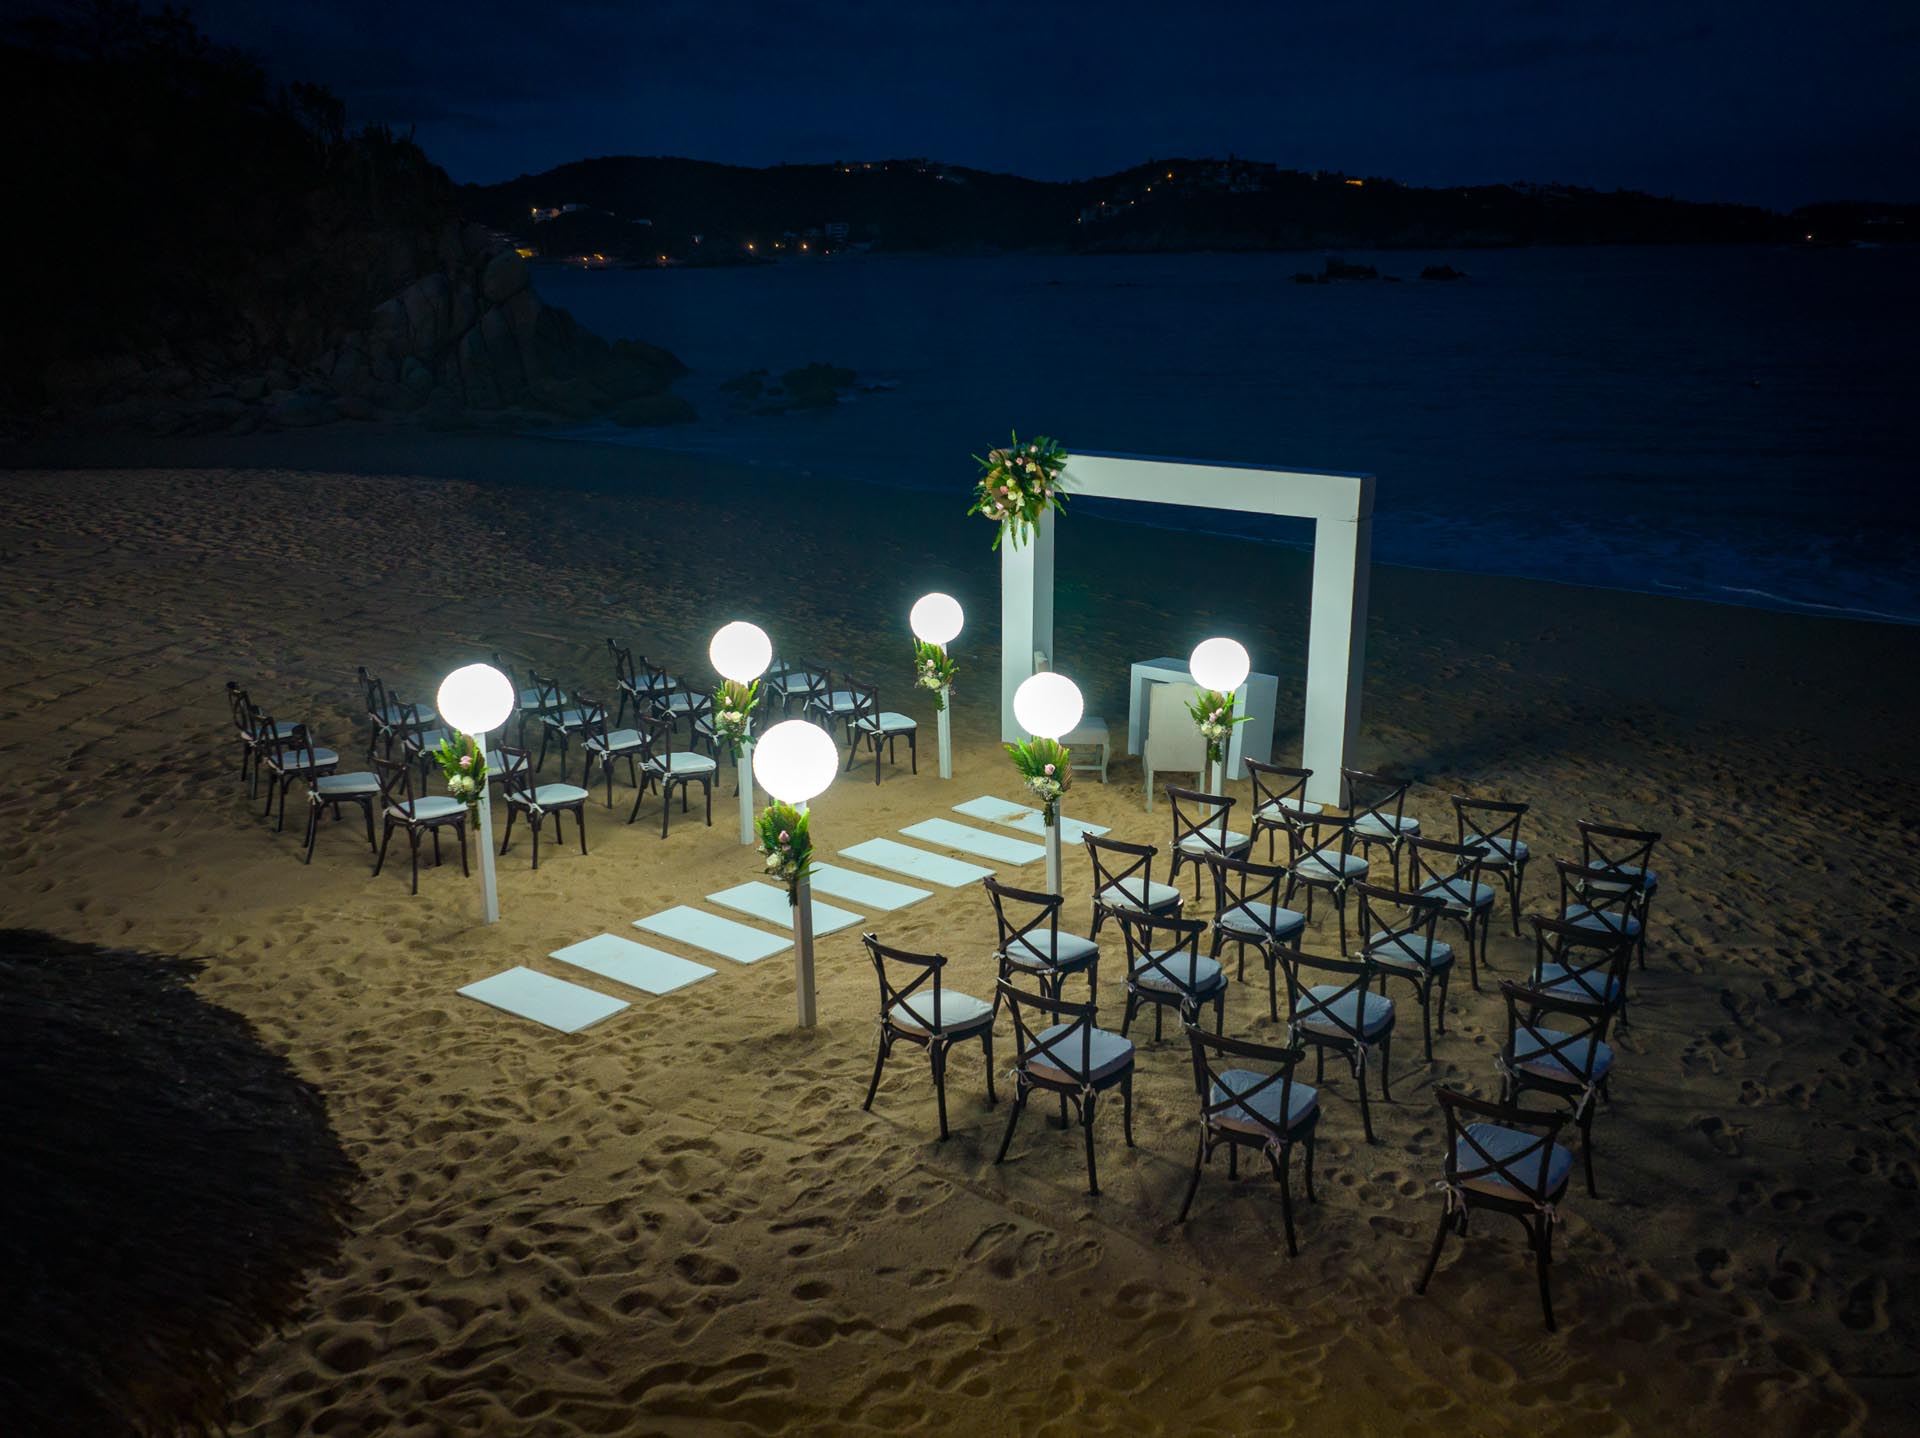 Event on the Beach at night